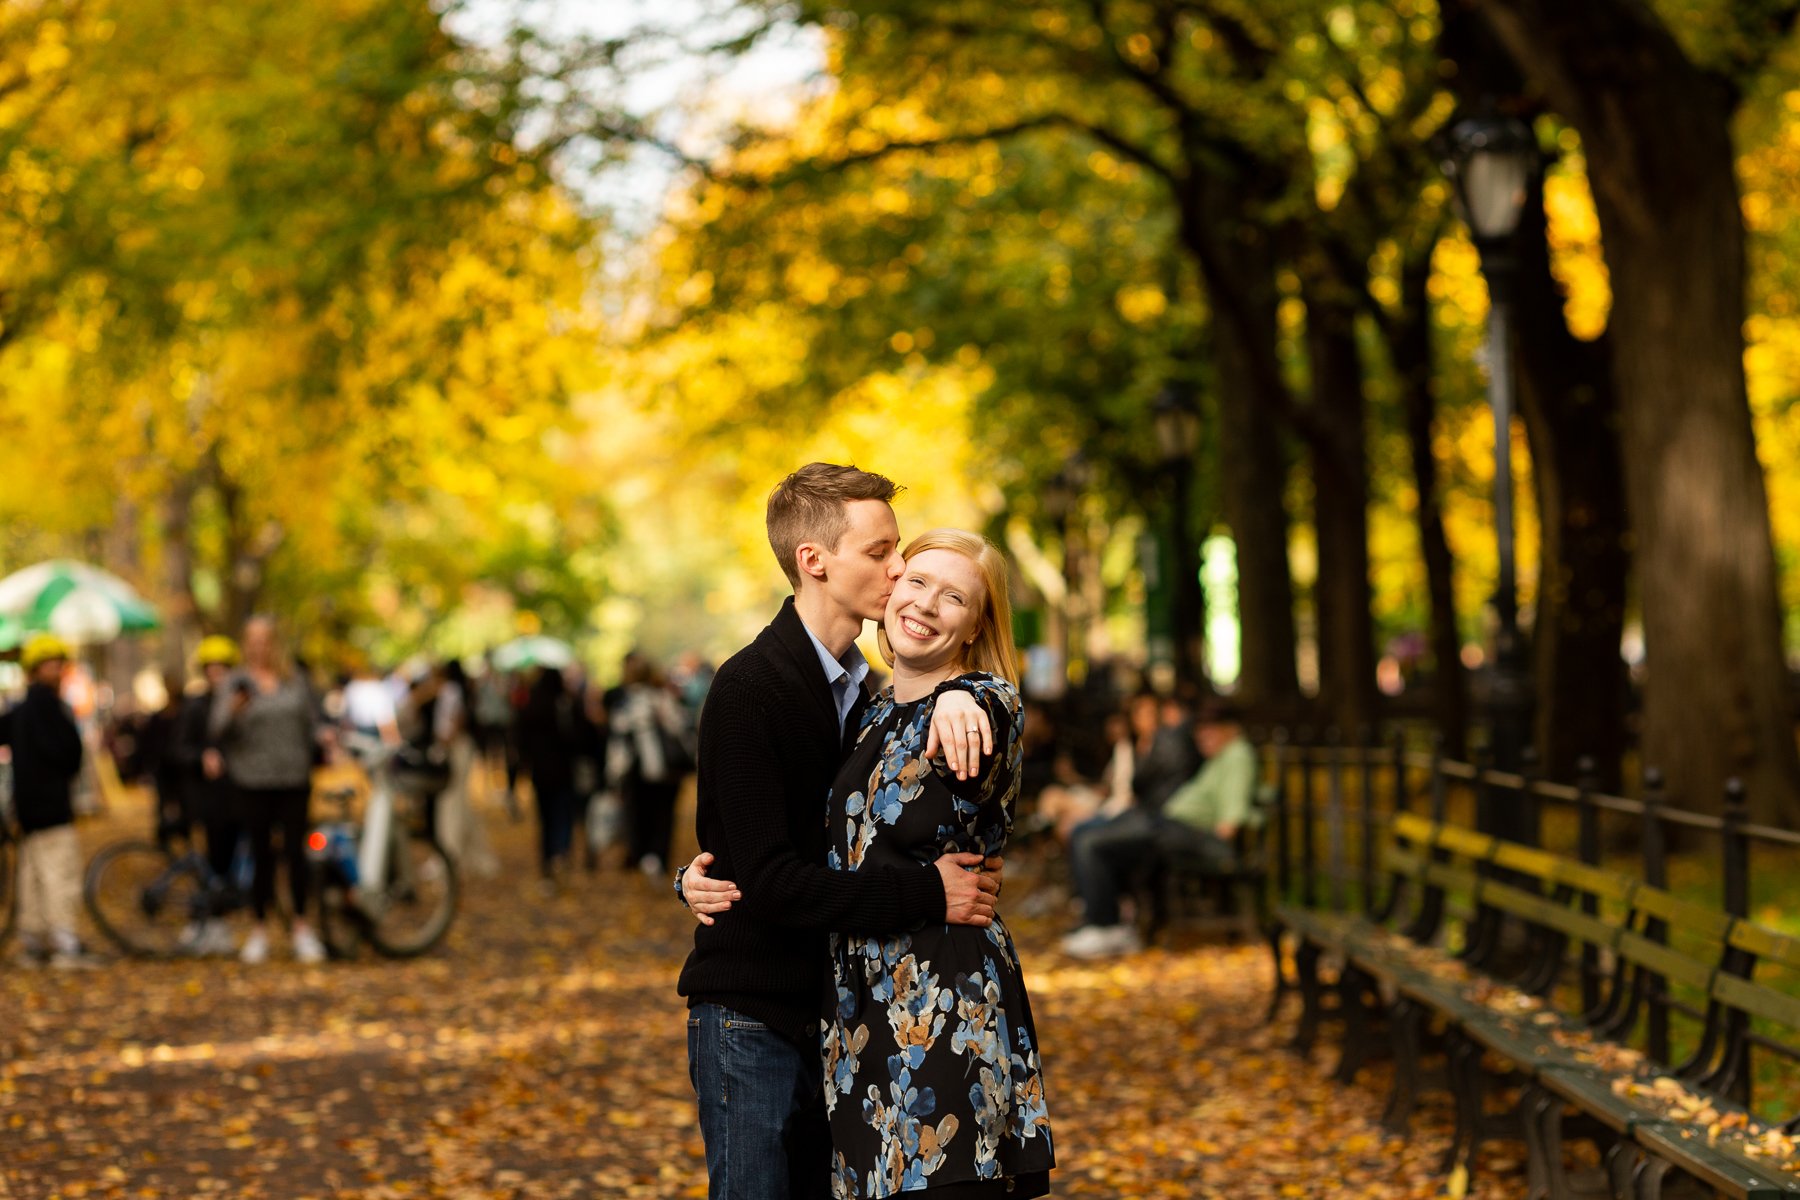 Central Park Fall Foliage Engagement Session_0013.jpg